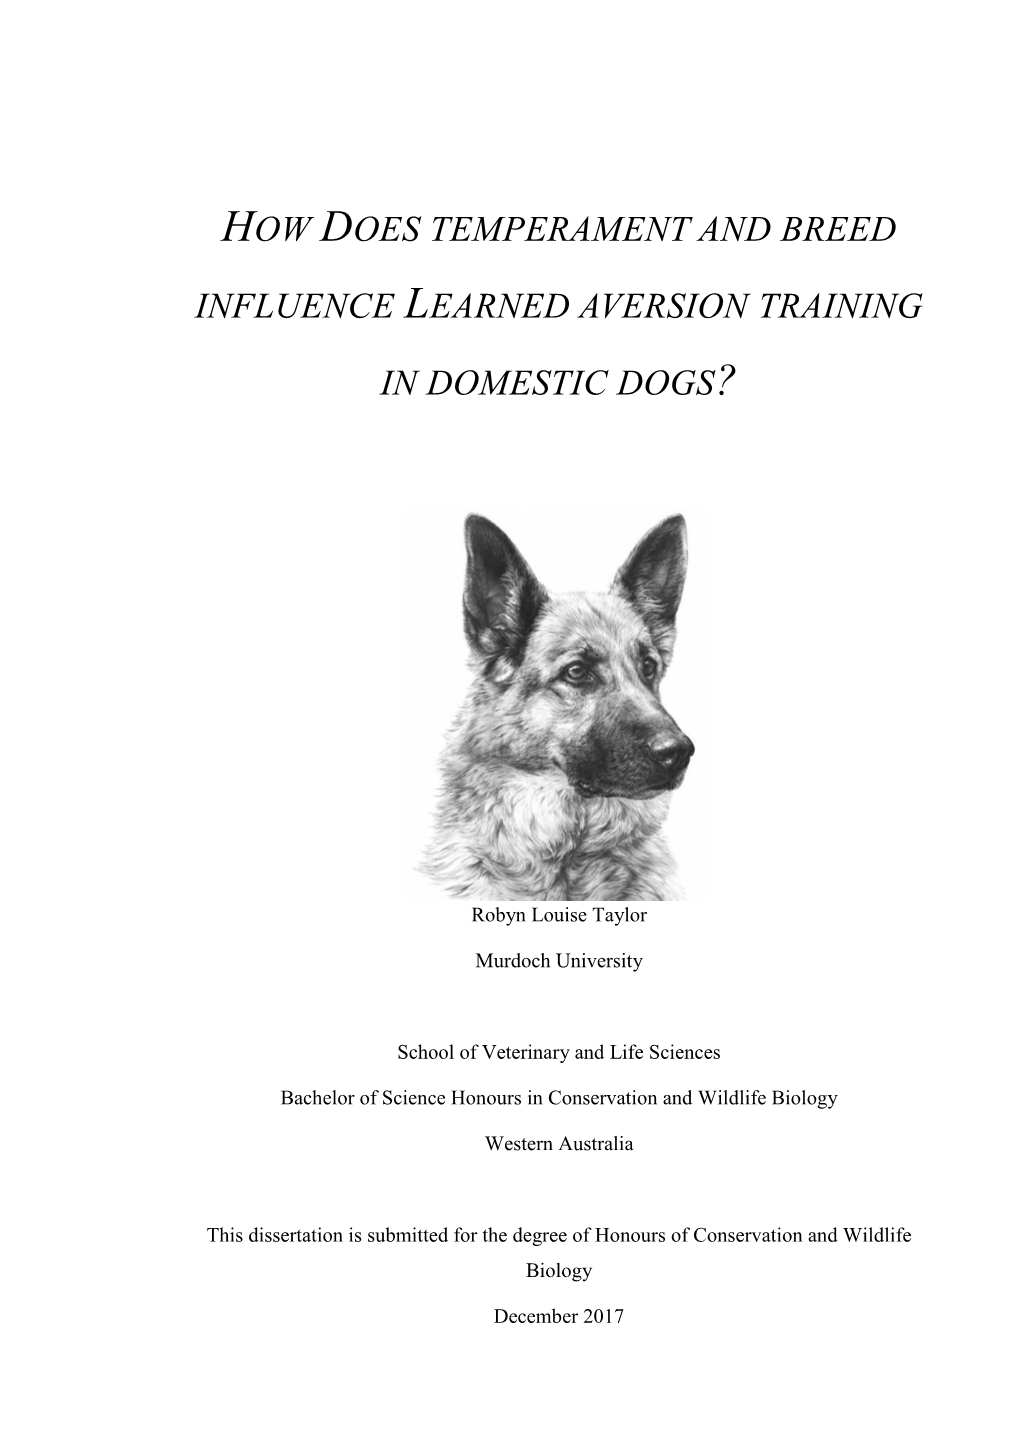 How Does Temperament and Breed Influence Learned Aversion Training in Domestic Dogs? Robyn Louise Taylor October 2017 Murdoch University